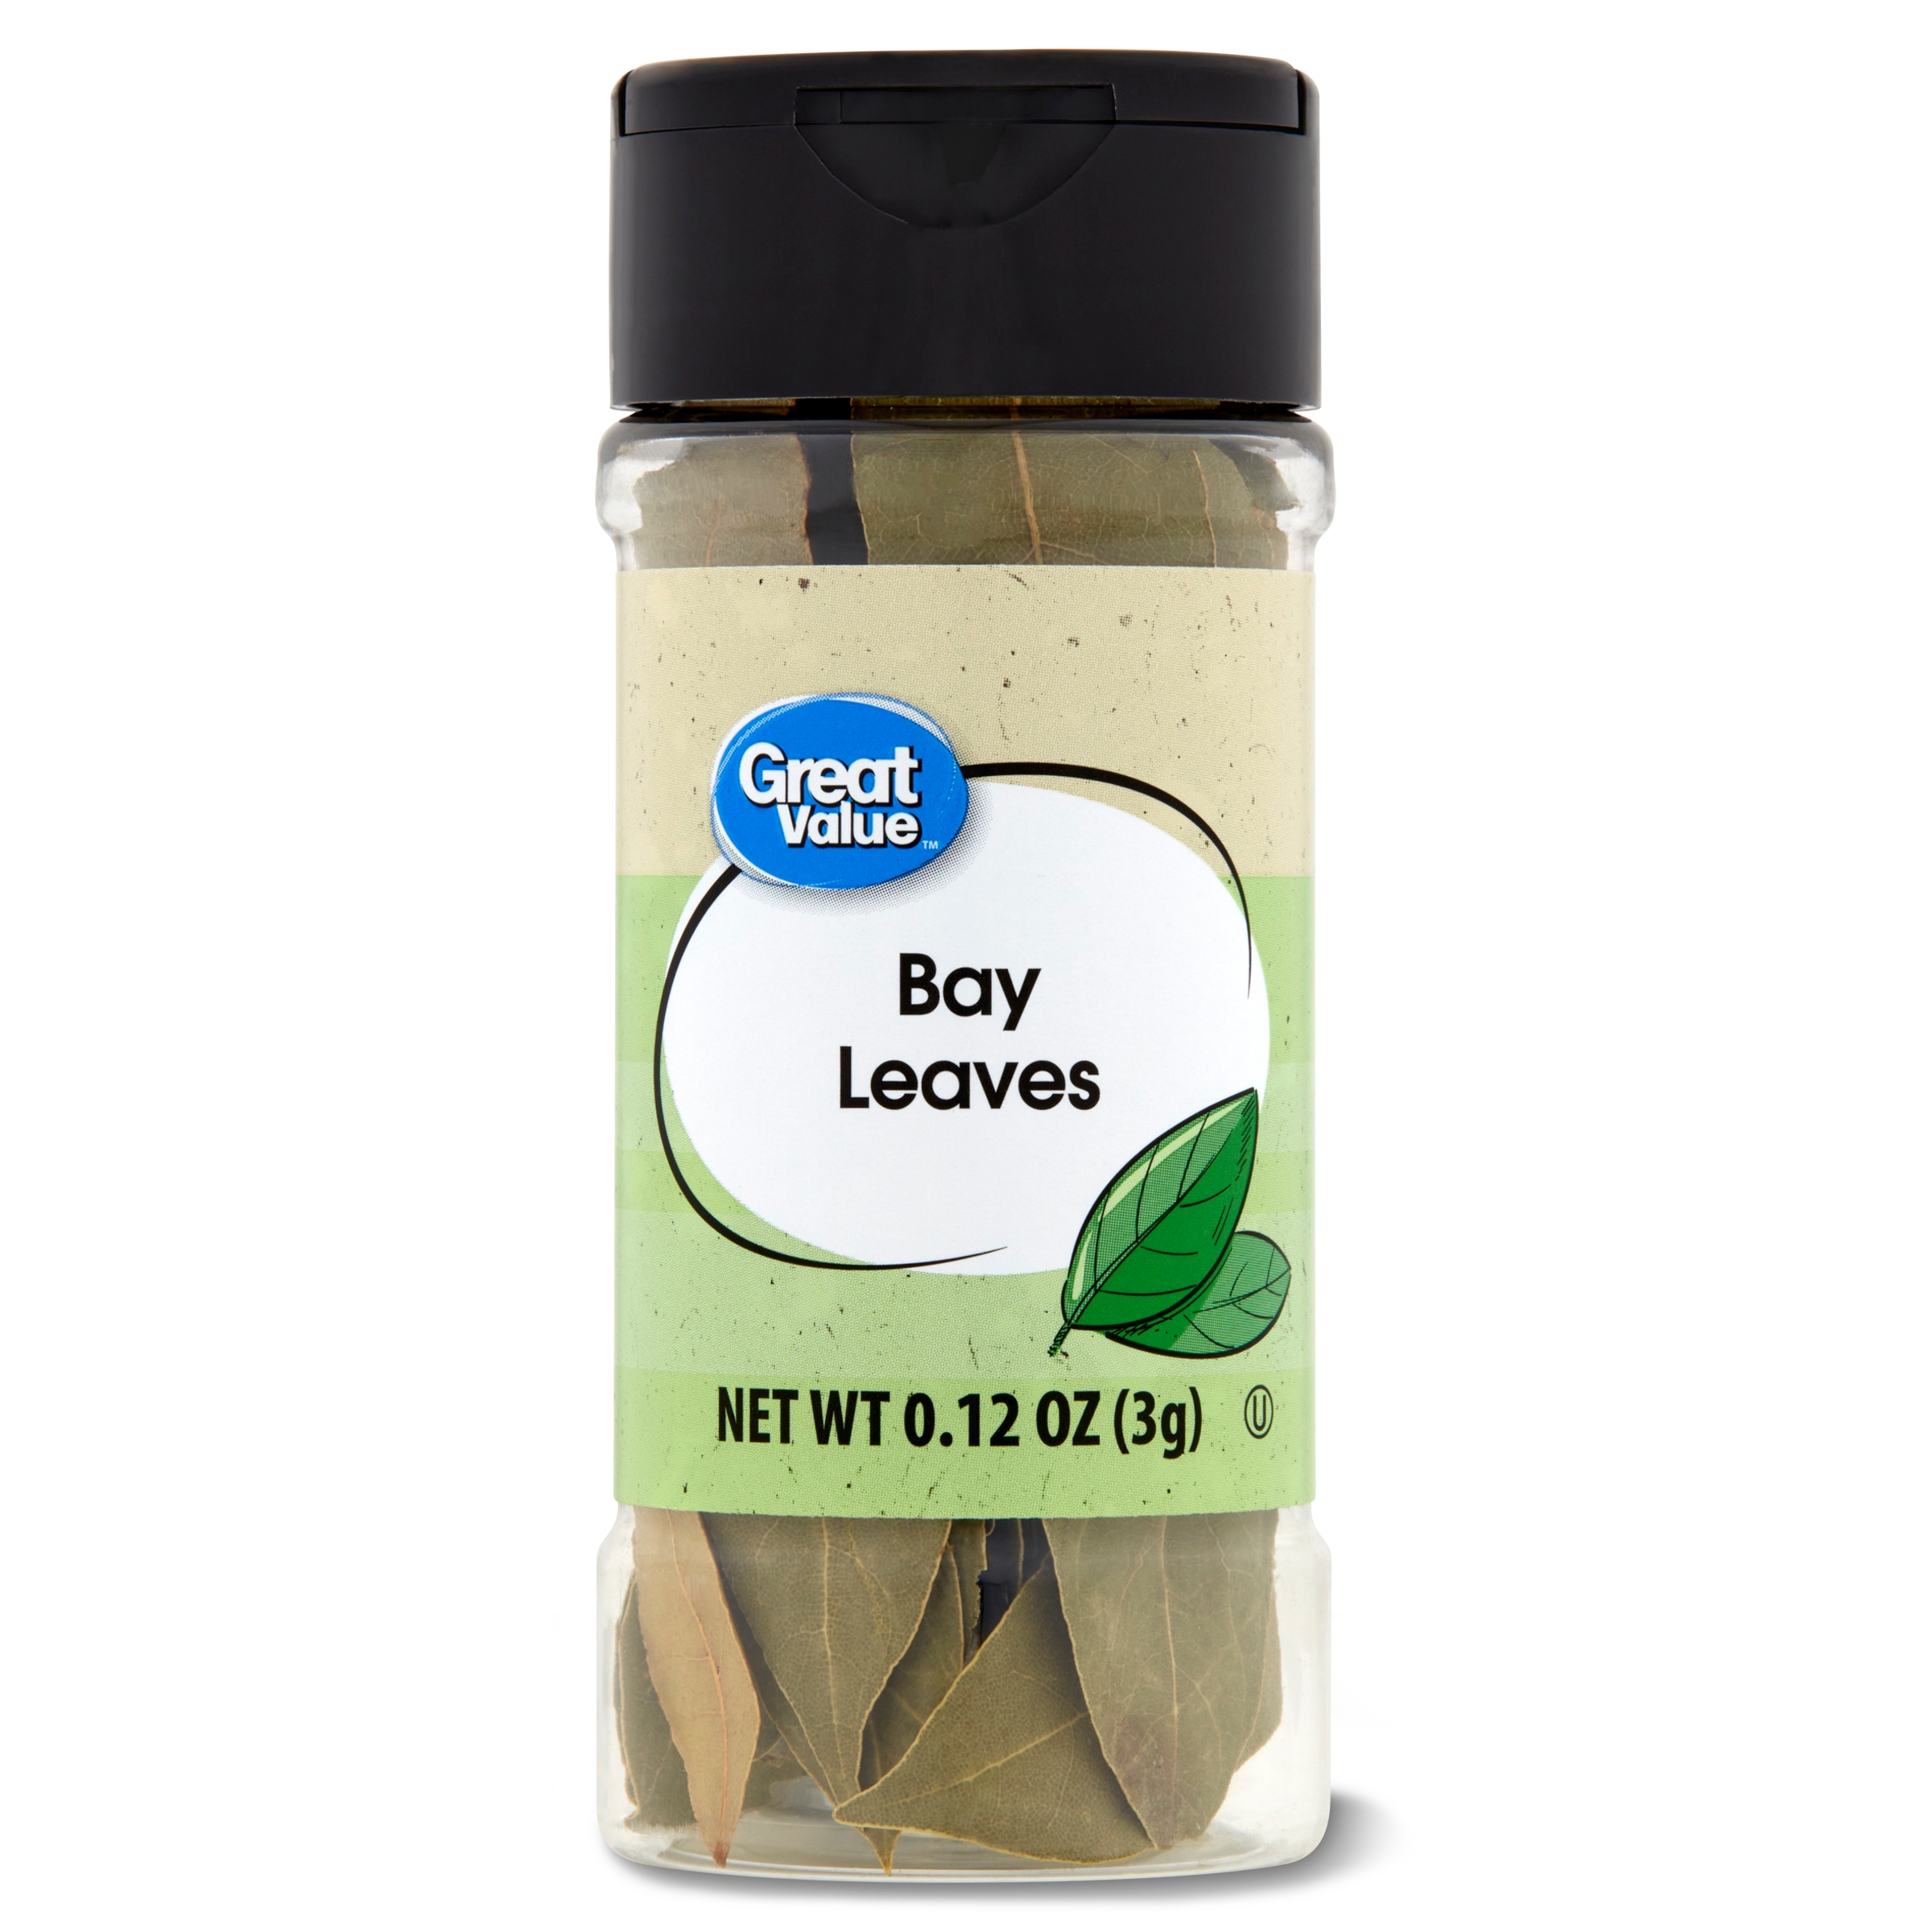 Great Value Bay Leaves, 0.12 oz - image 2 of 11